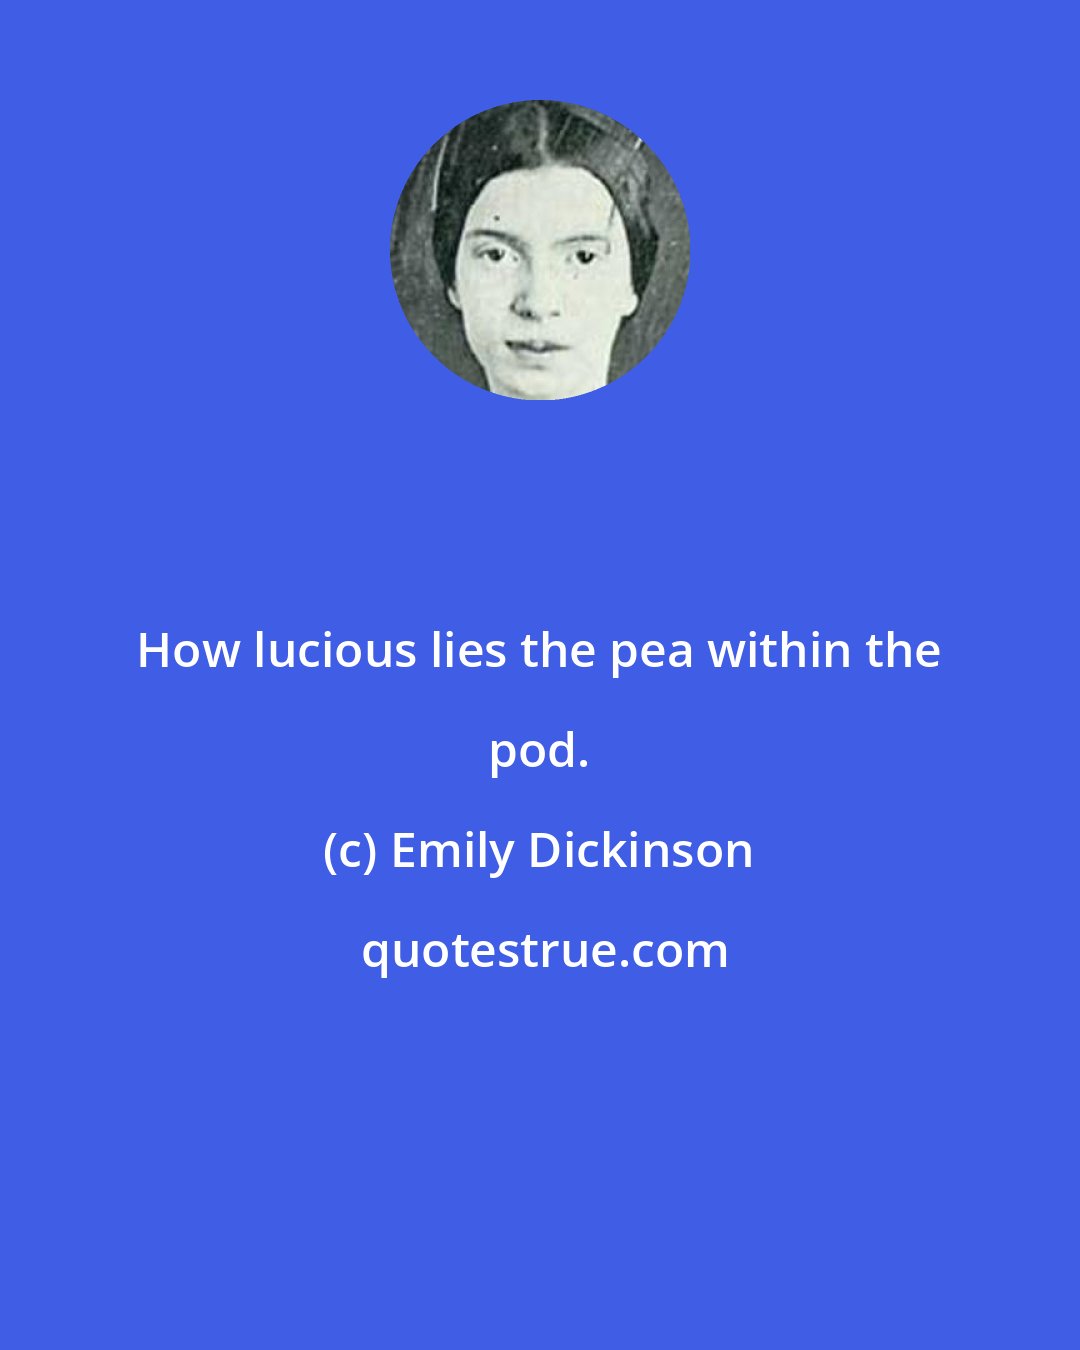 Emily Dickinson: How lucious lies the pea within the pod.